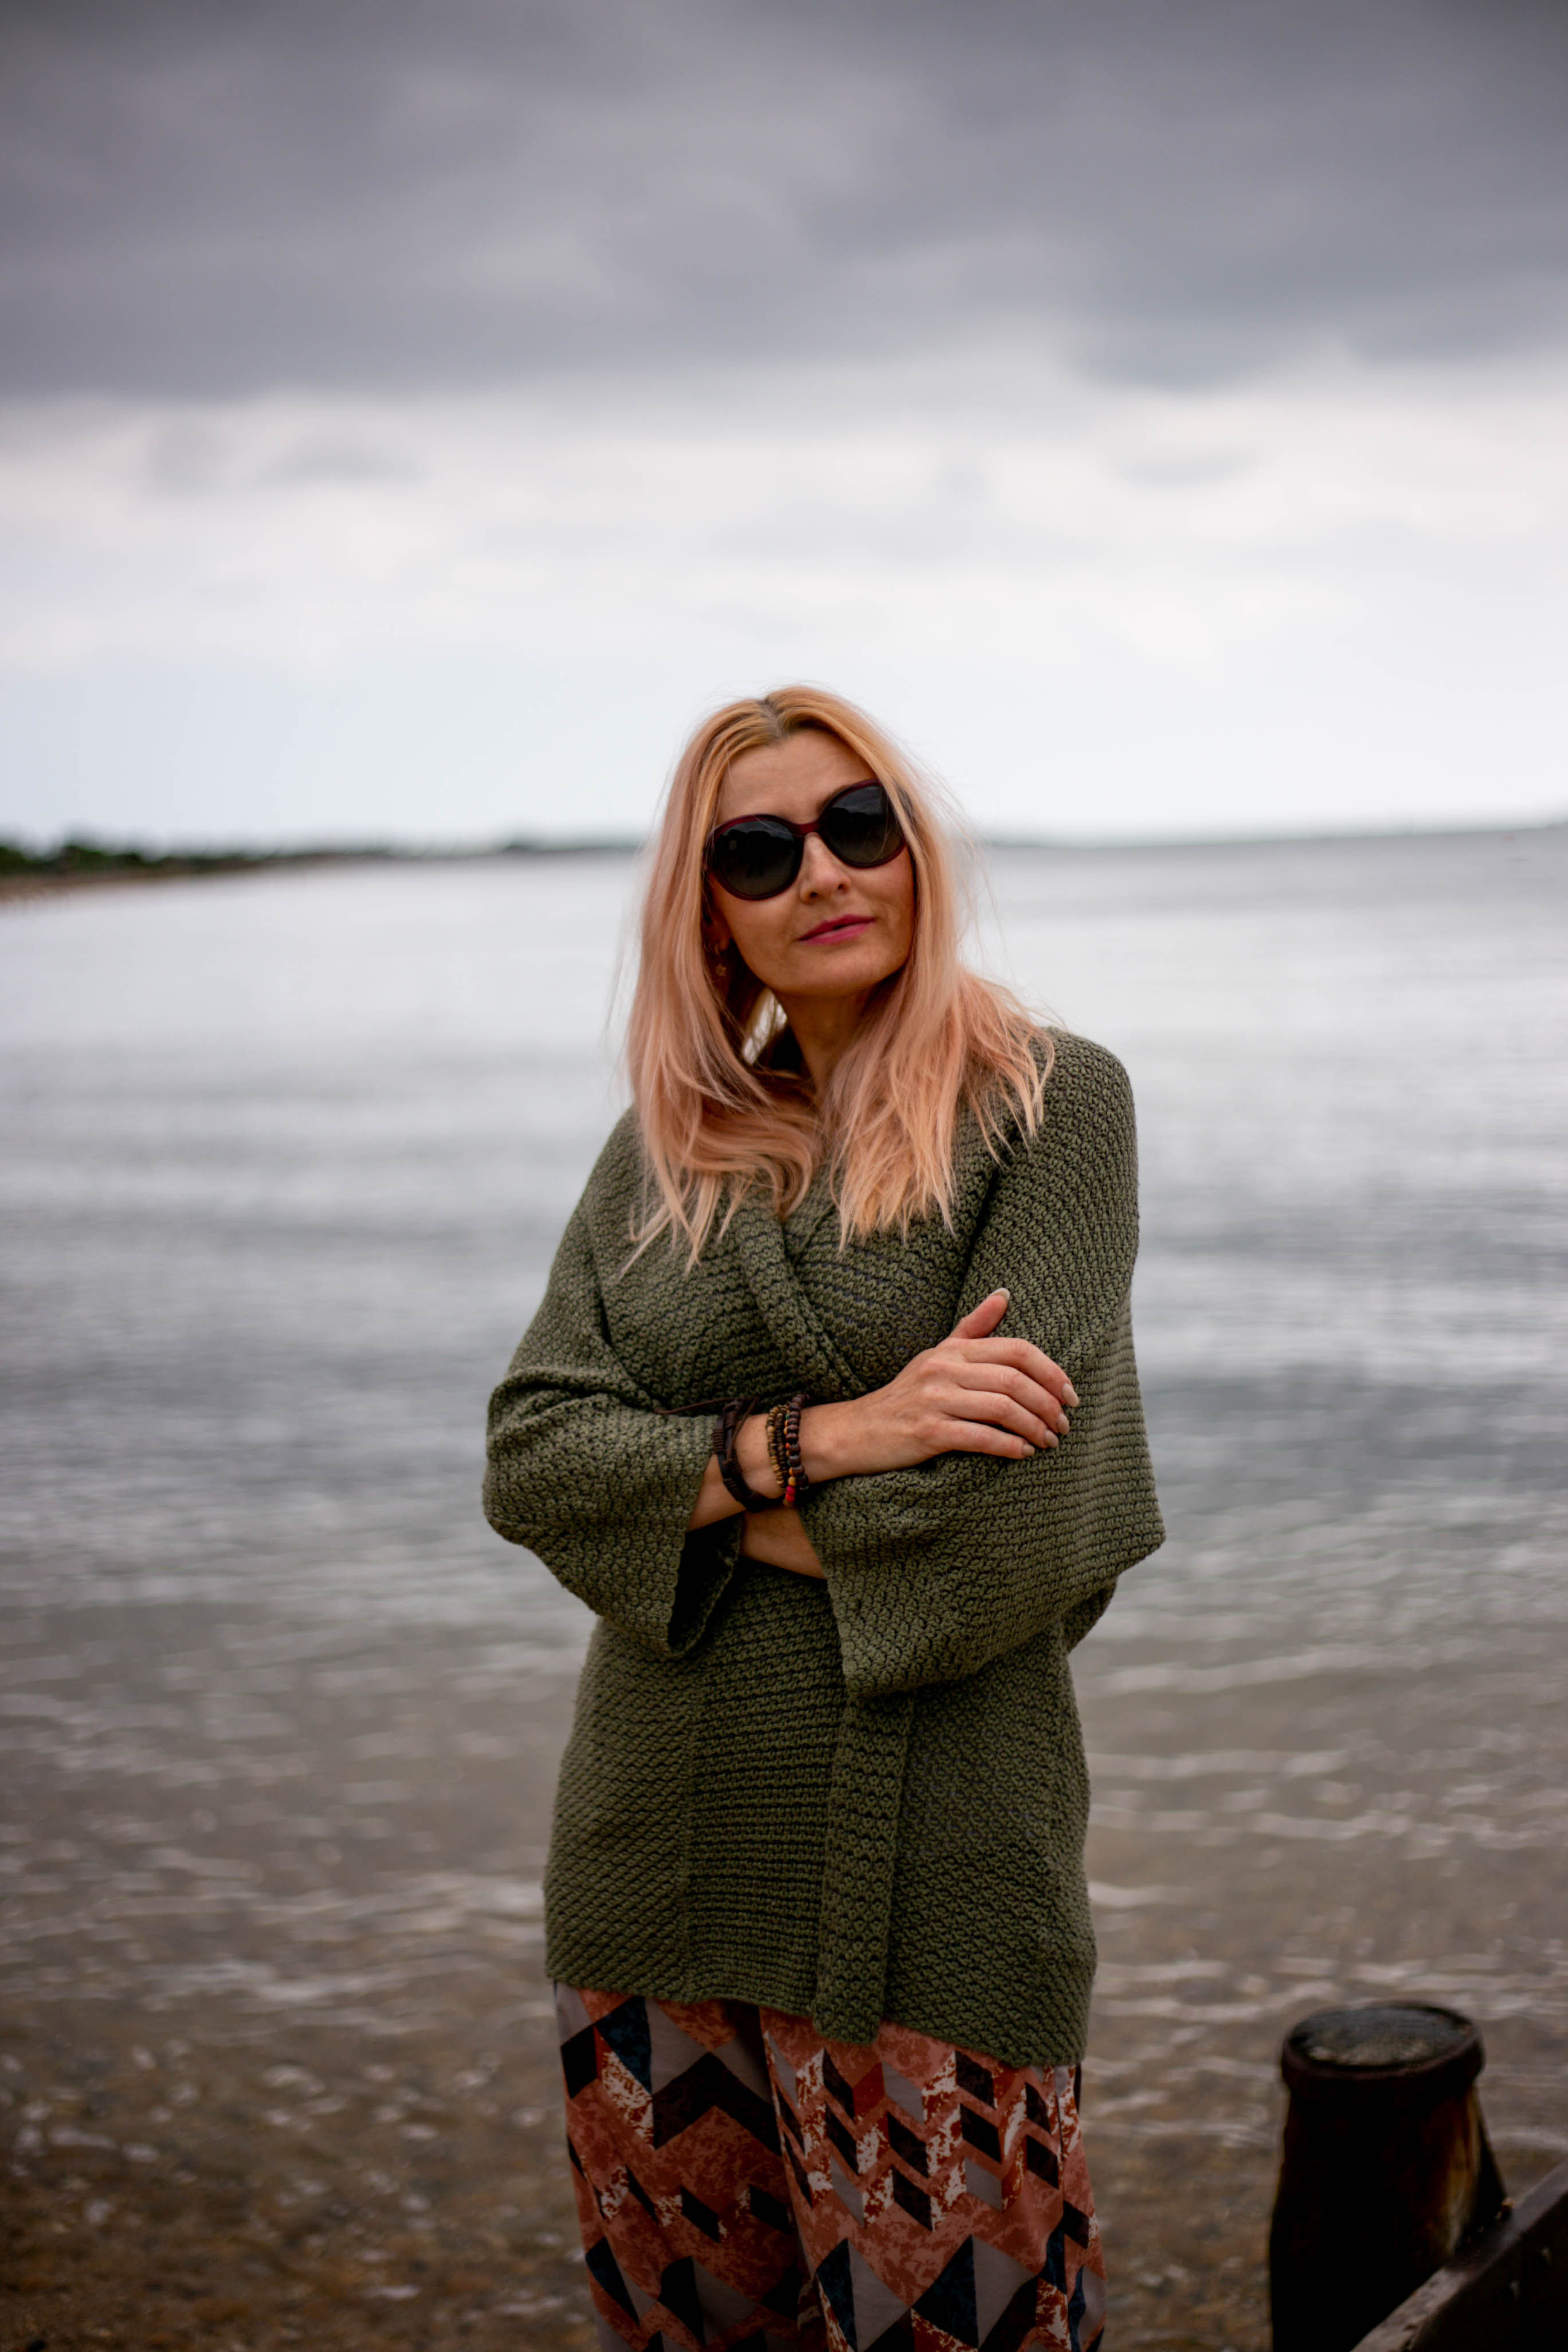 Moody South Coast Beach Shots With Autumnal Styling | Catherine Summers AKA Not Dressed As Lamb, Over 40 Fashion and Style